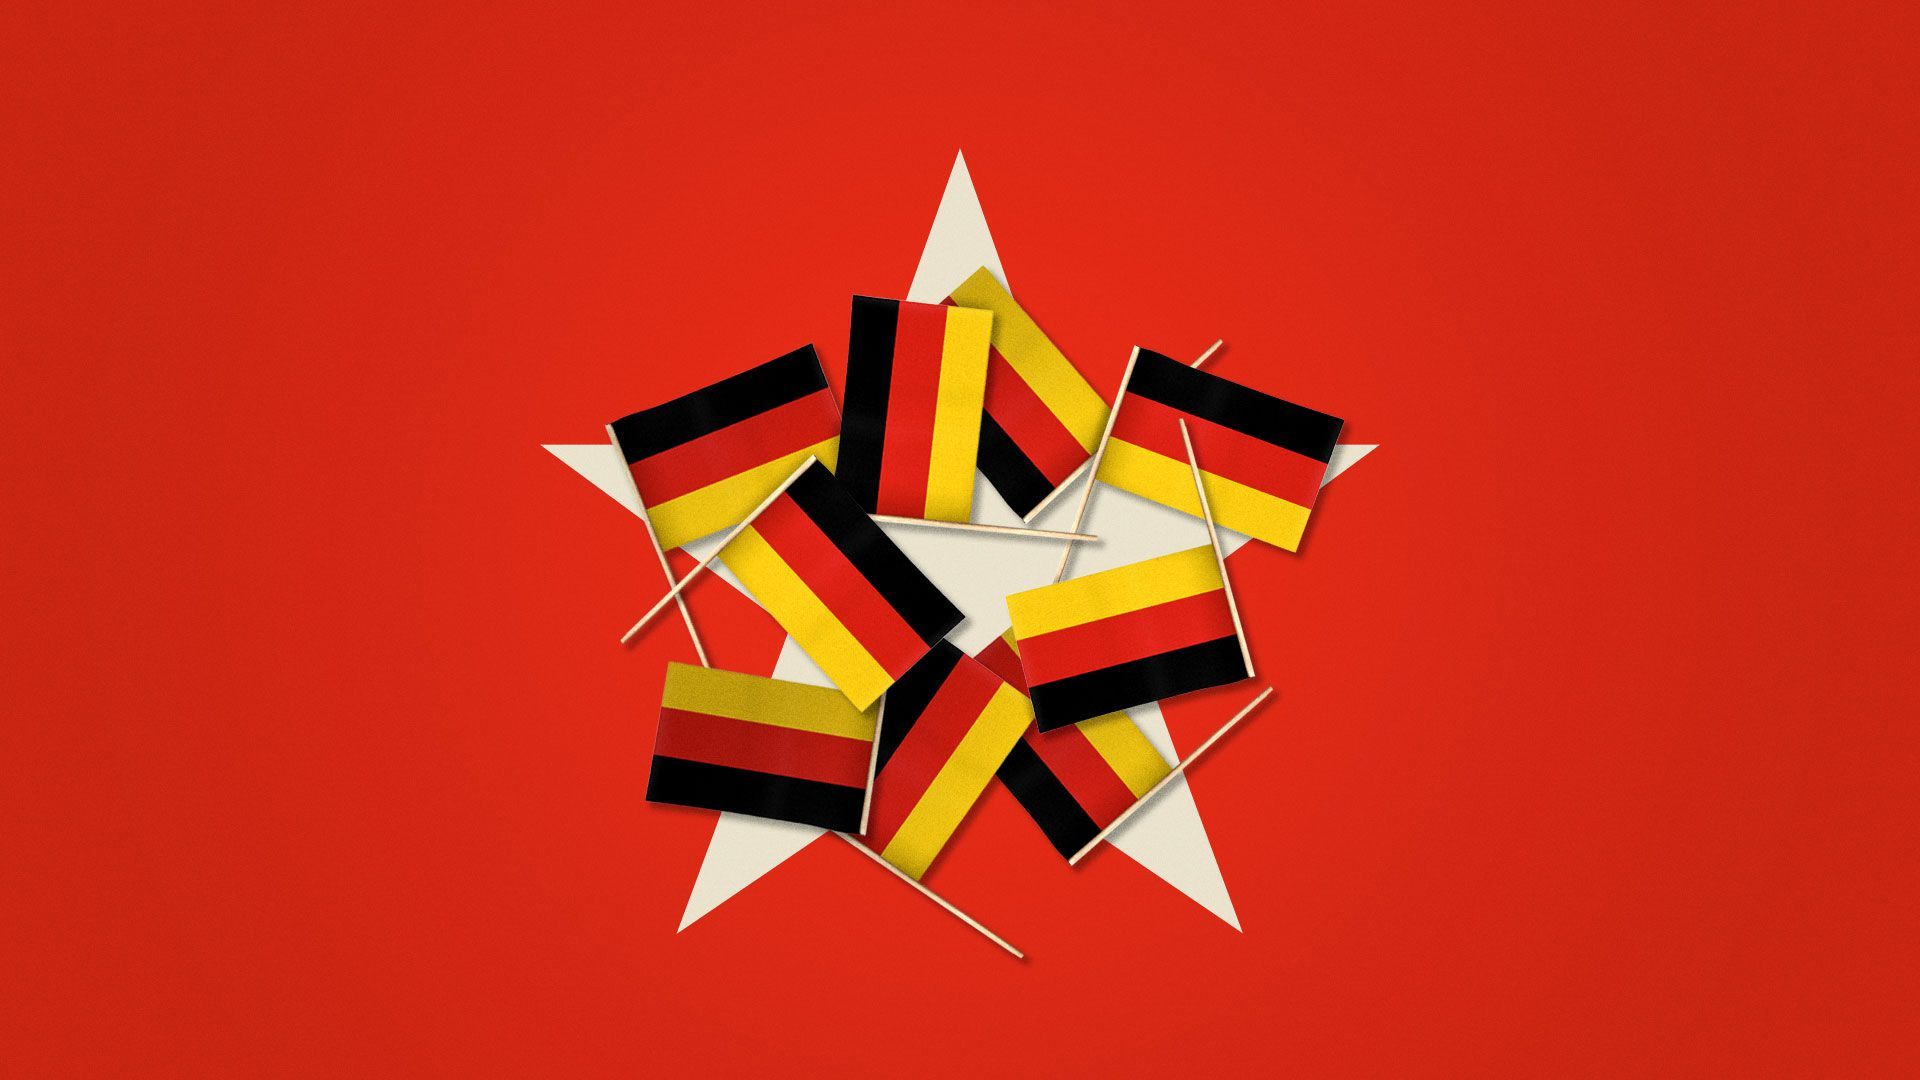 Illustration of German flags covering a large star